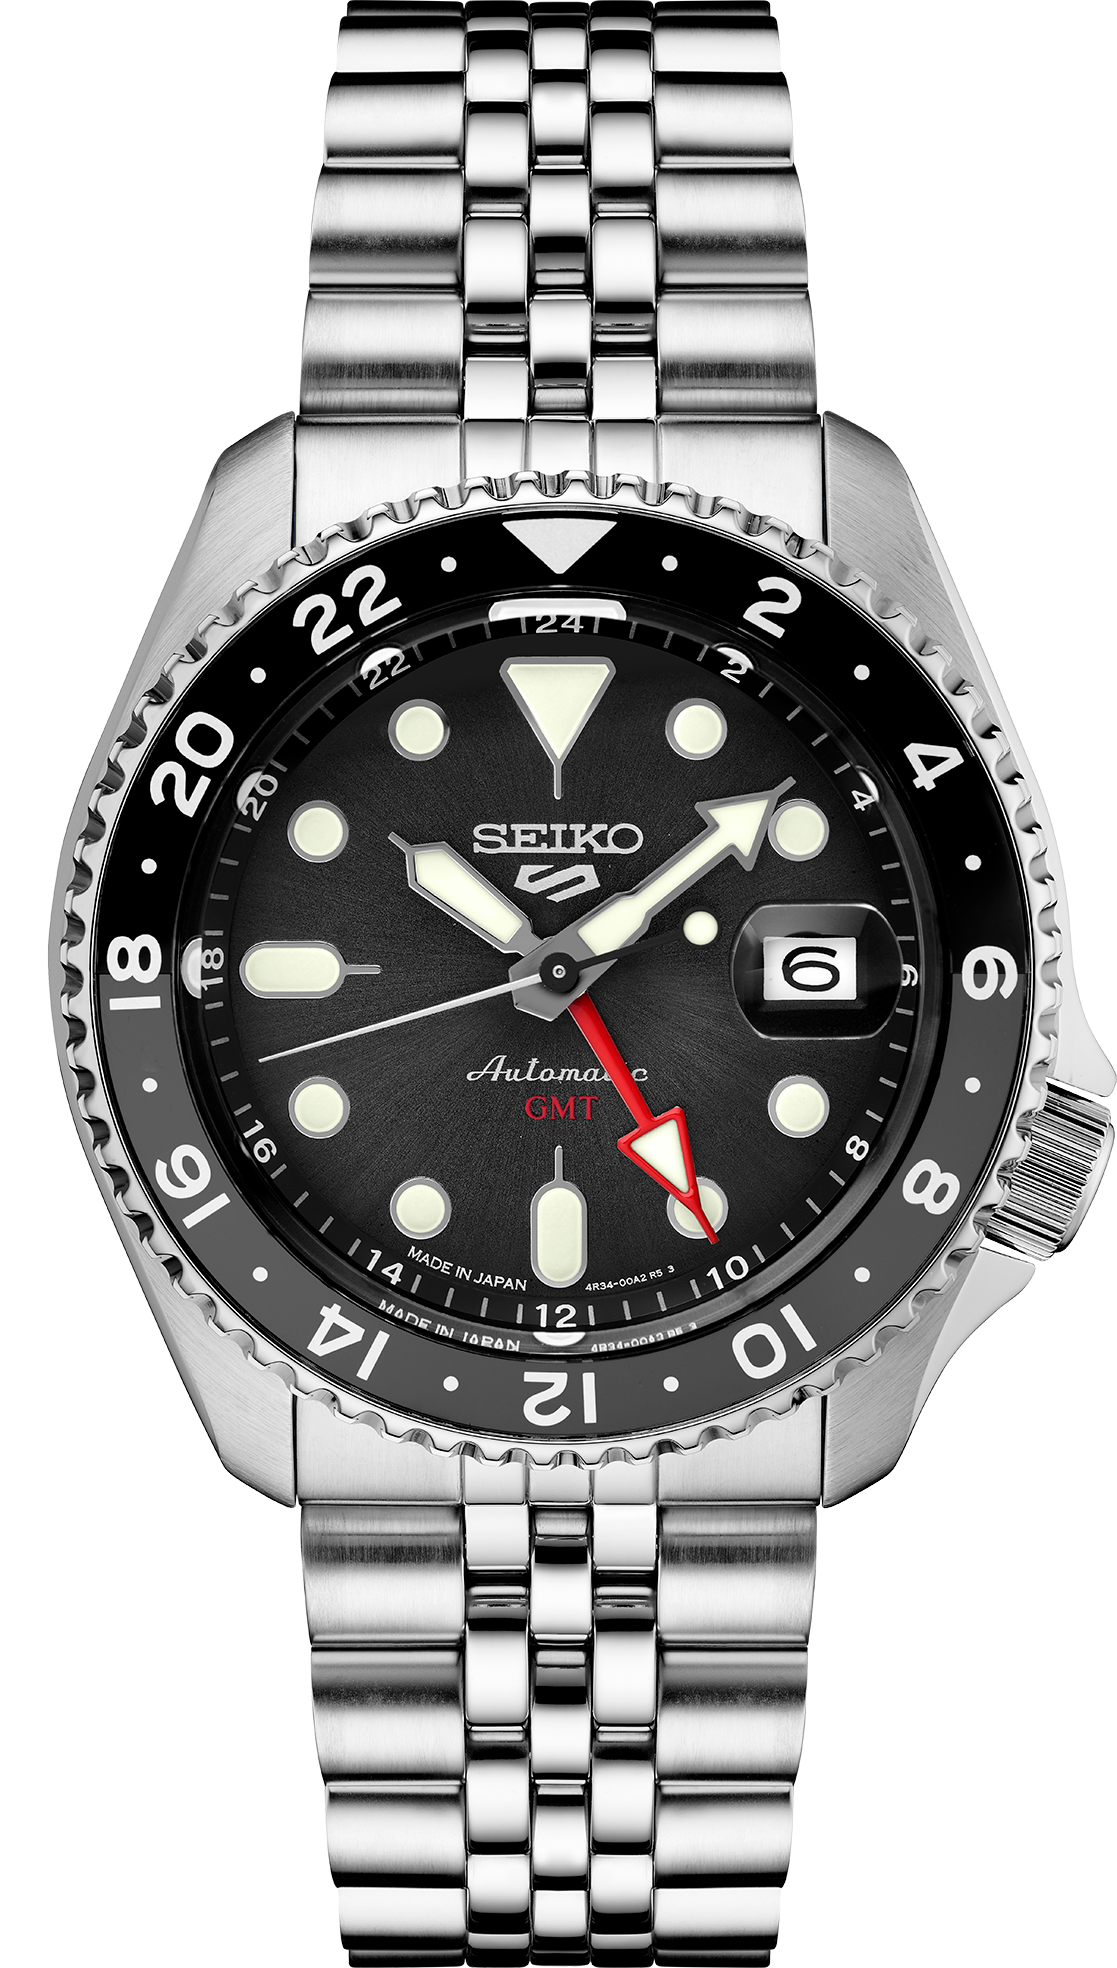 SEIKO MEN'S 5 SPORTS Automatic Black-Dial & Red Accented GMT Watch